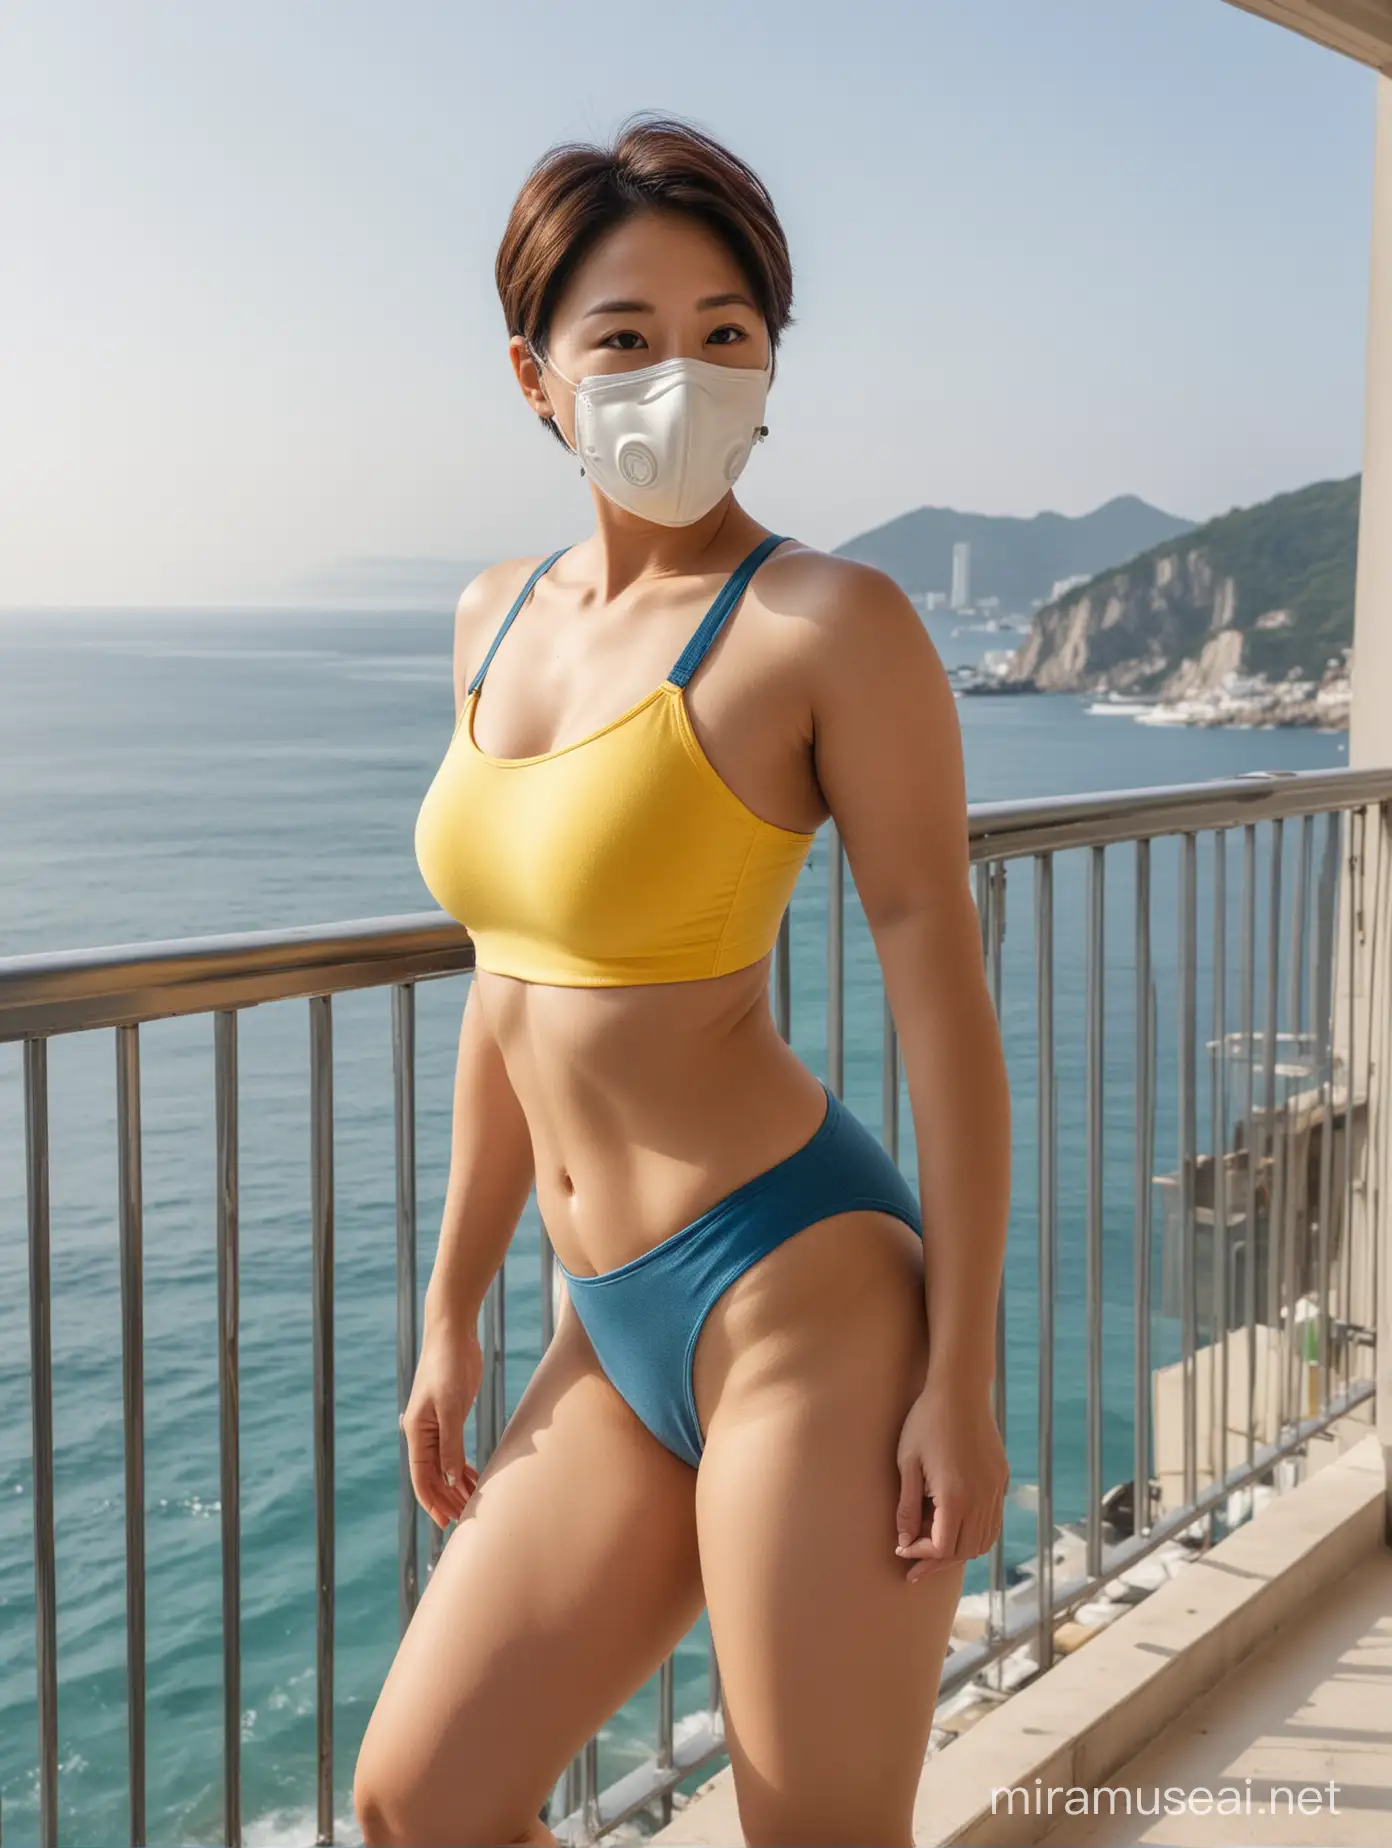 side angle view, an attractive, bodacious, short-haired korean woman in her 30s, in a respirator mask, standing with legs spread, on a balcony by the sea, wearing a padded yellow front-zip sports bra, and knit blue and white bikini bottoms